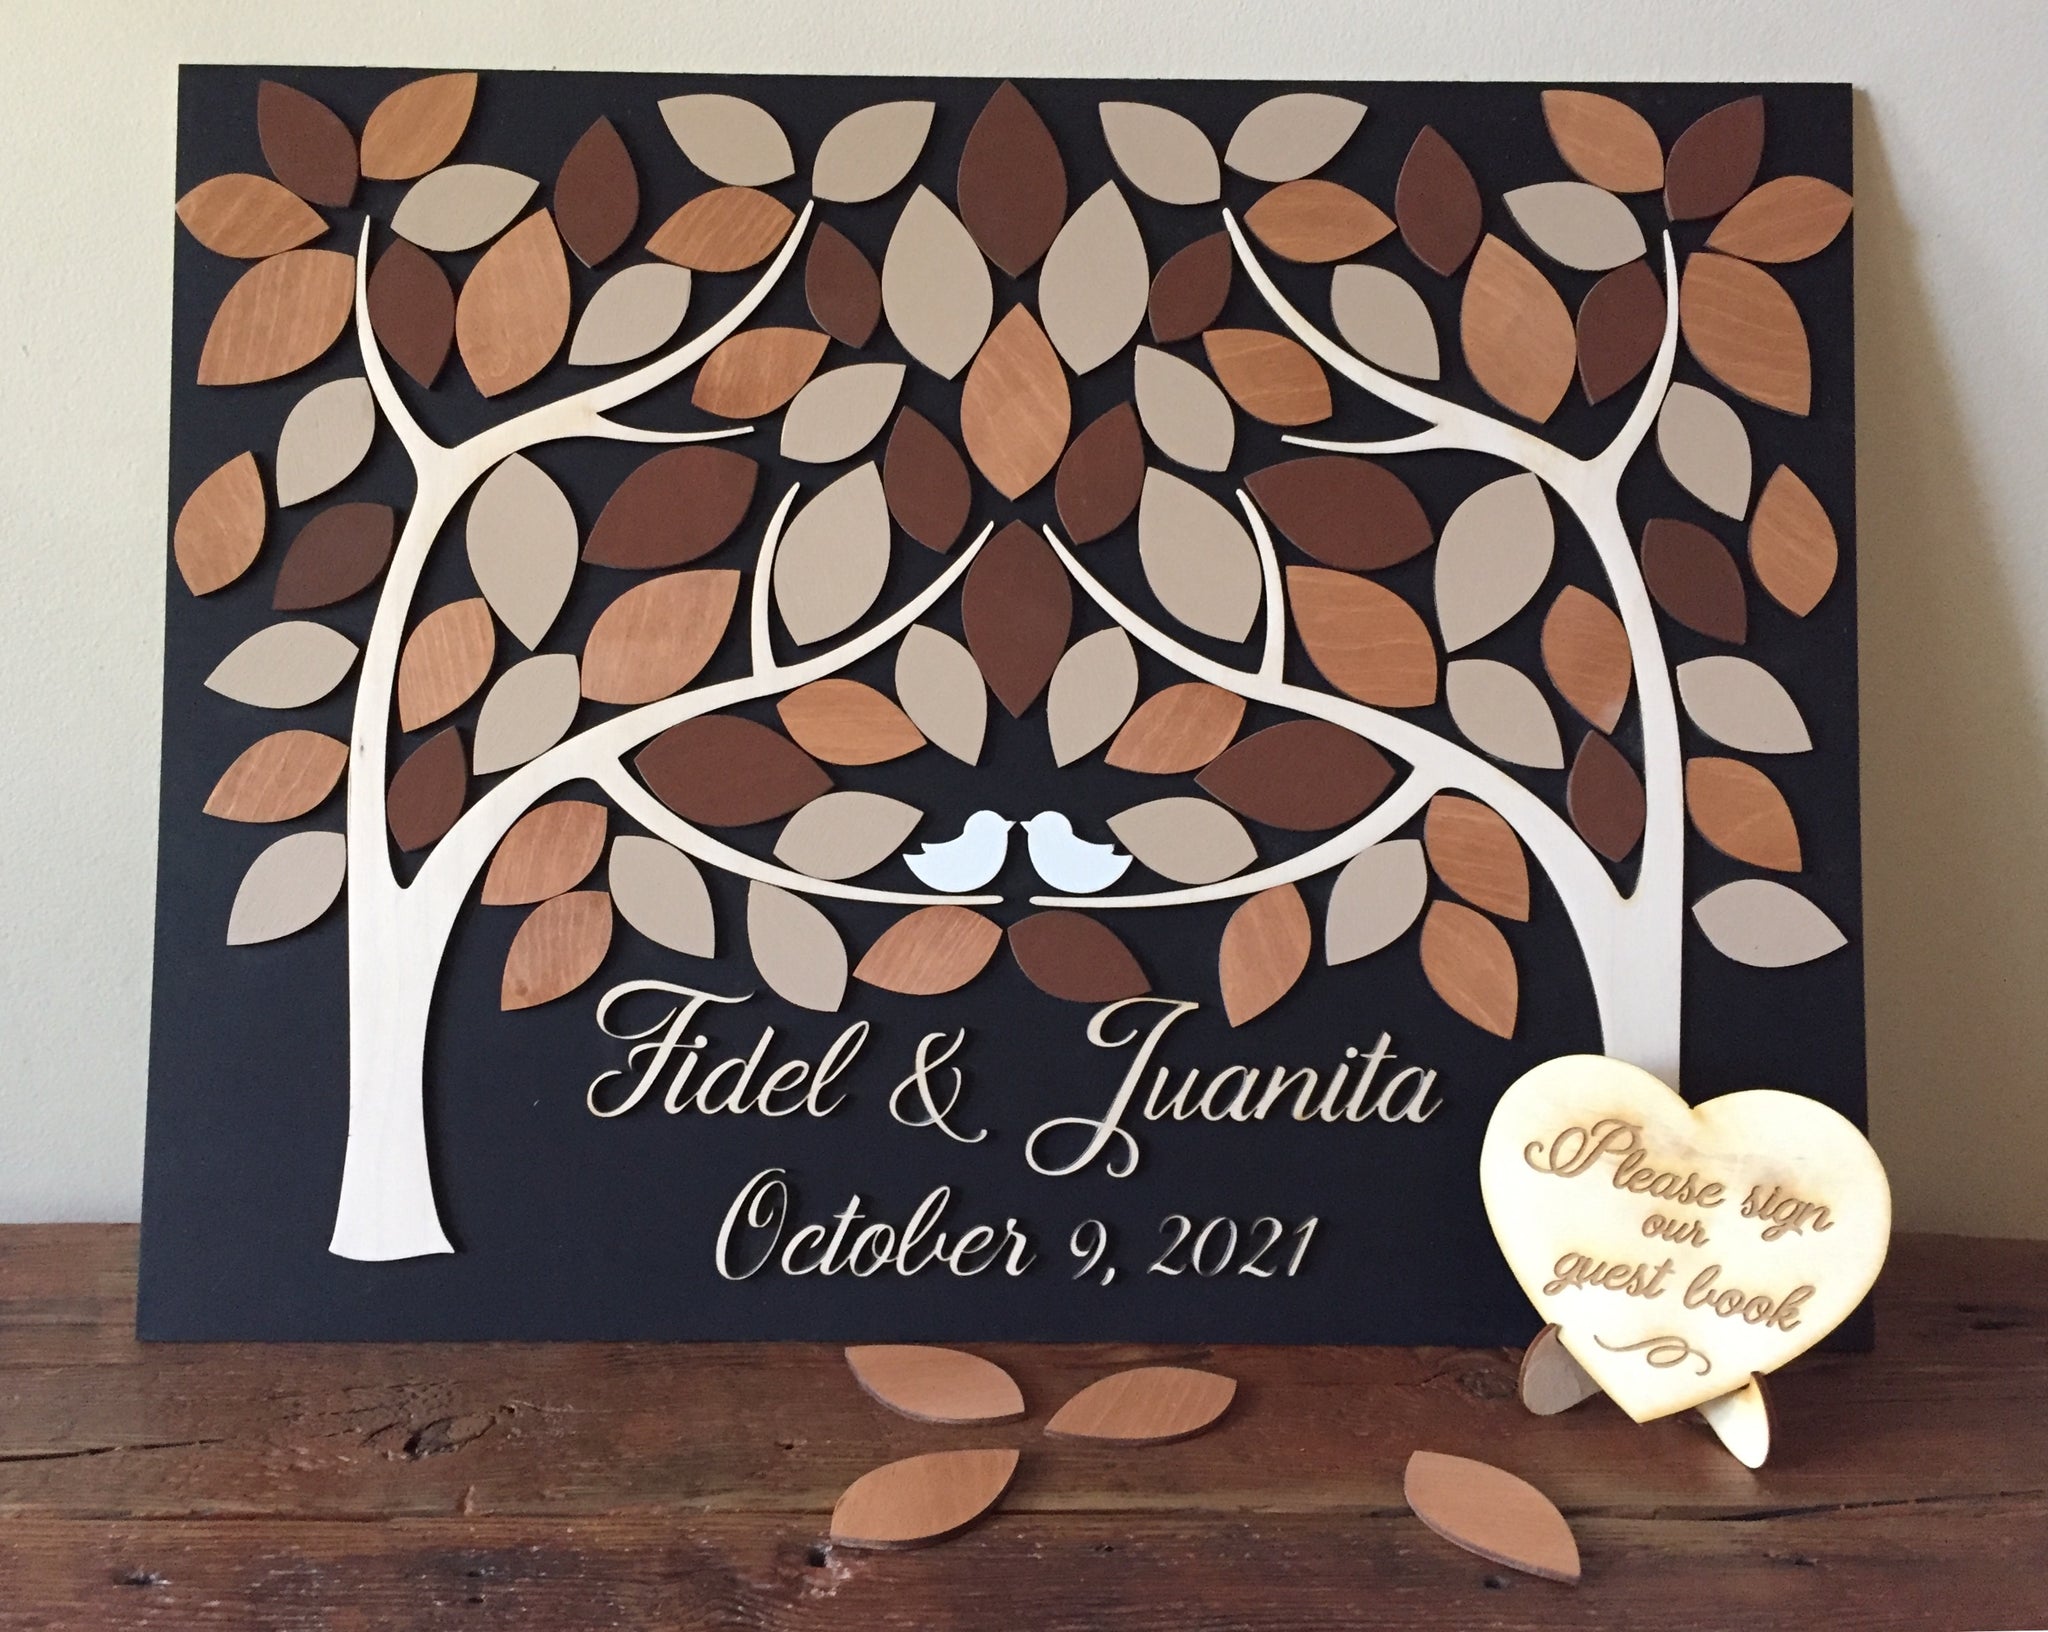 Custom wood guest book alternative with personalized details and colors, made with two trees that grow together